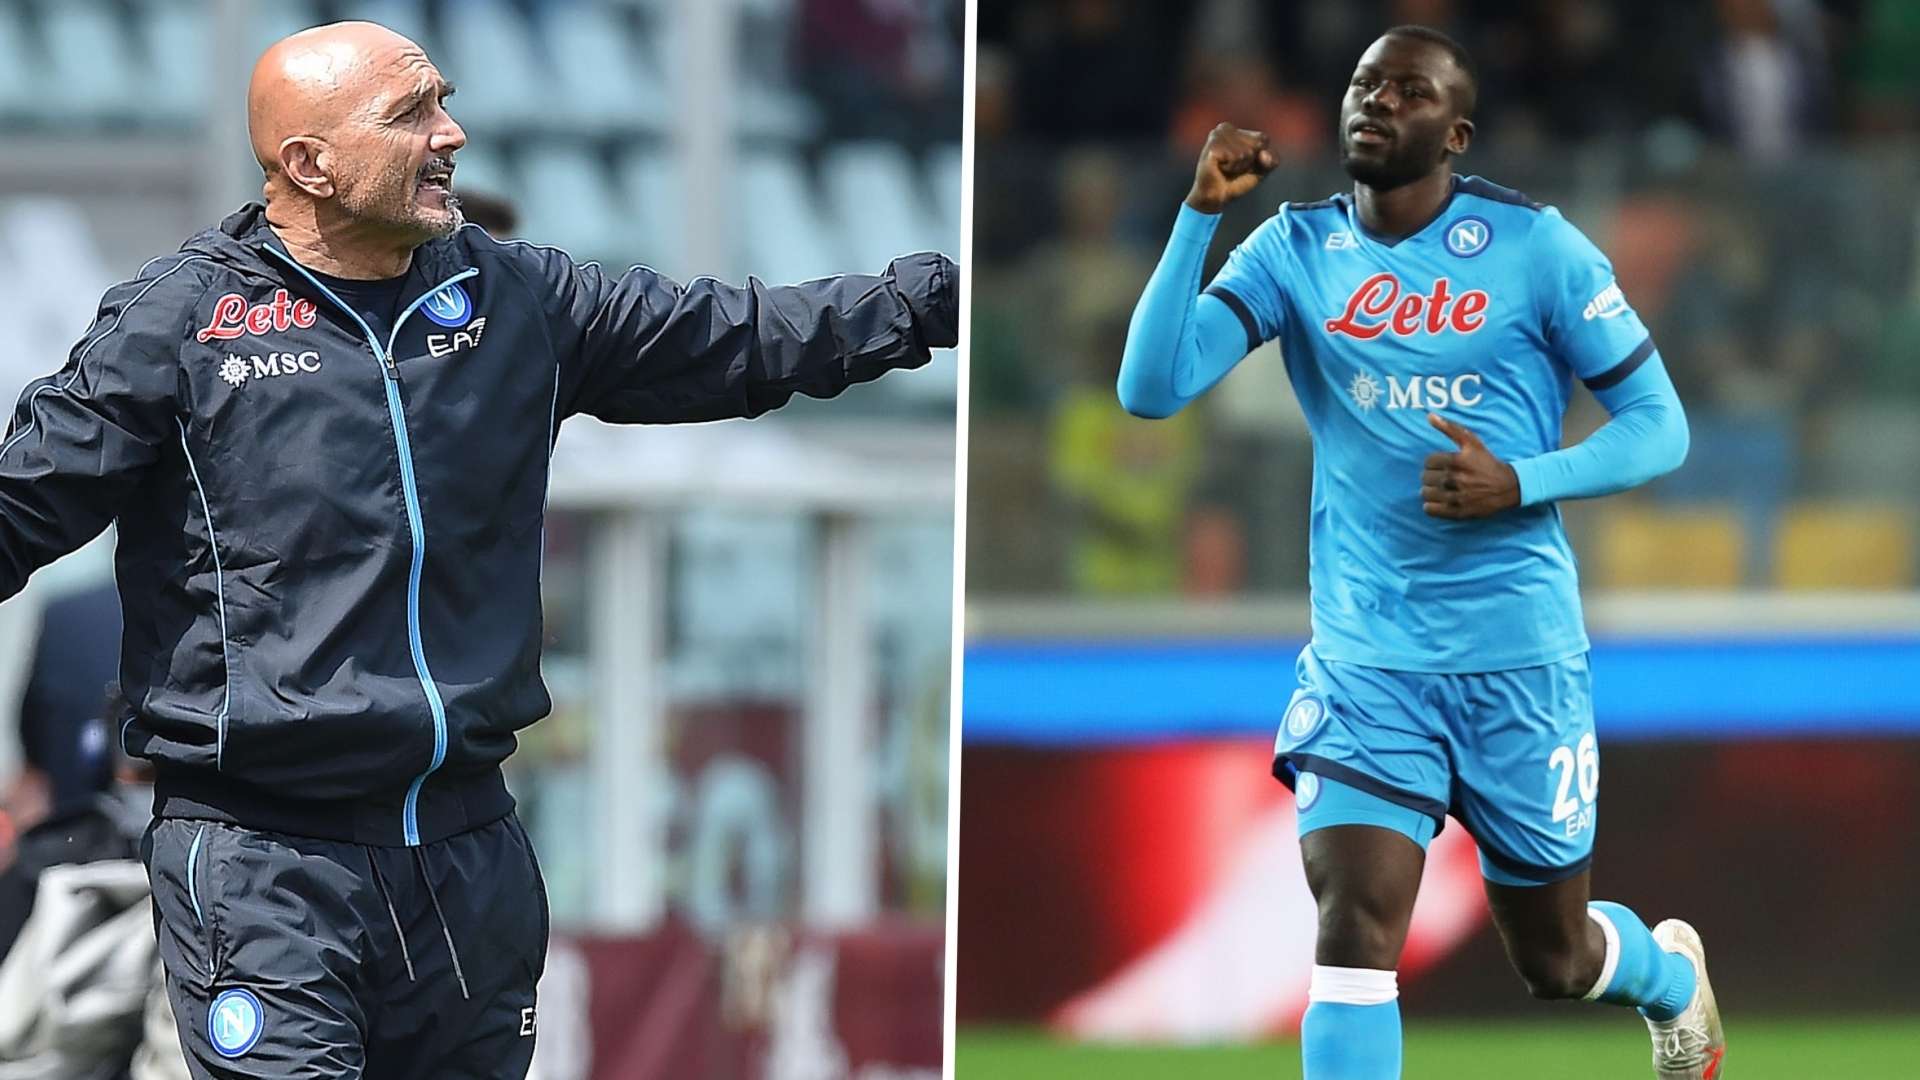 Luciano Spalletti of Napoli and Koulibaly of Senegal.